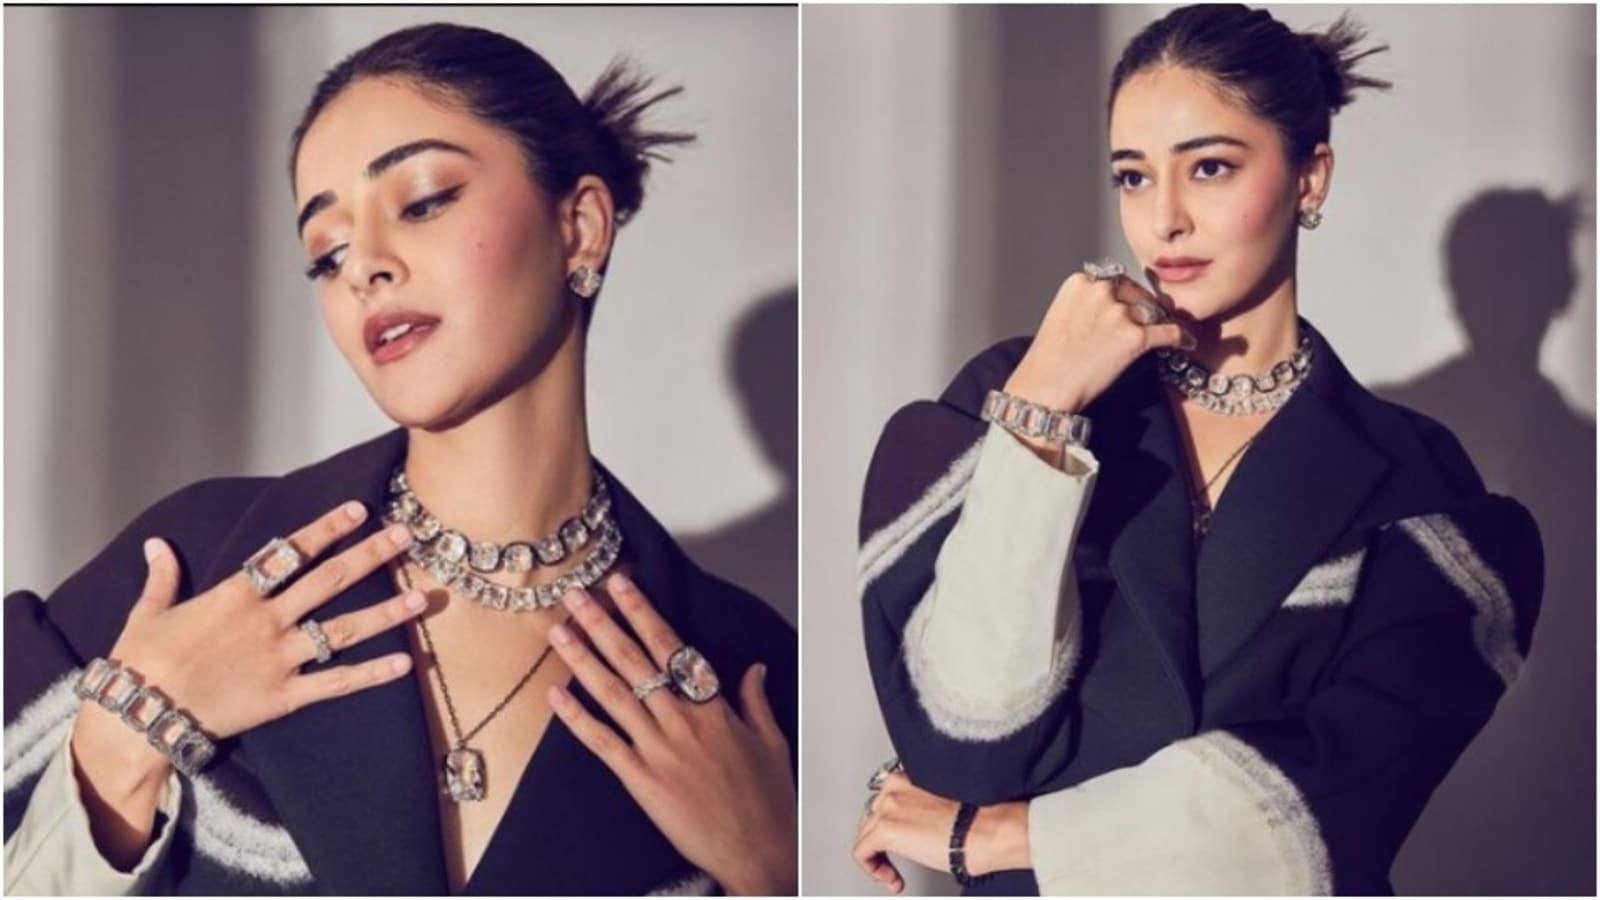 Ananya Panday feels ‘iced out’ in a stunning pantsuit. Suhana Khan is loving it